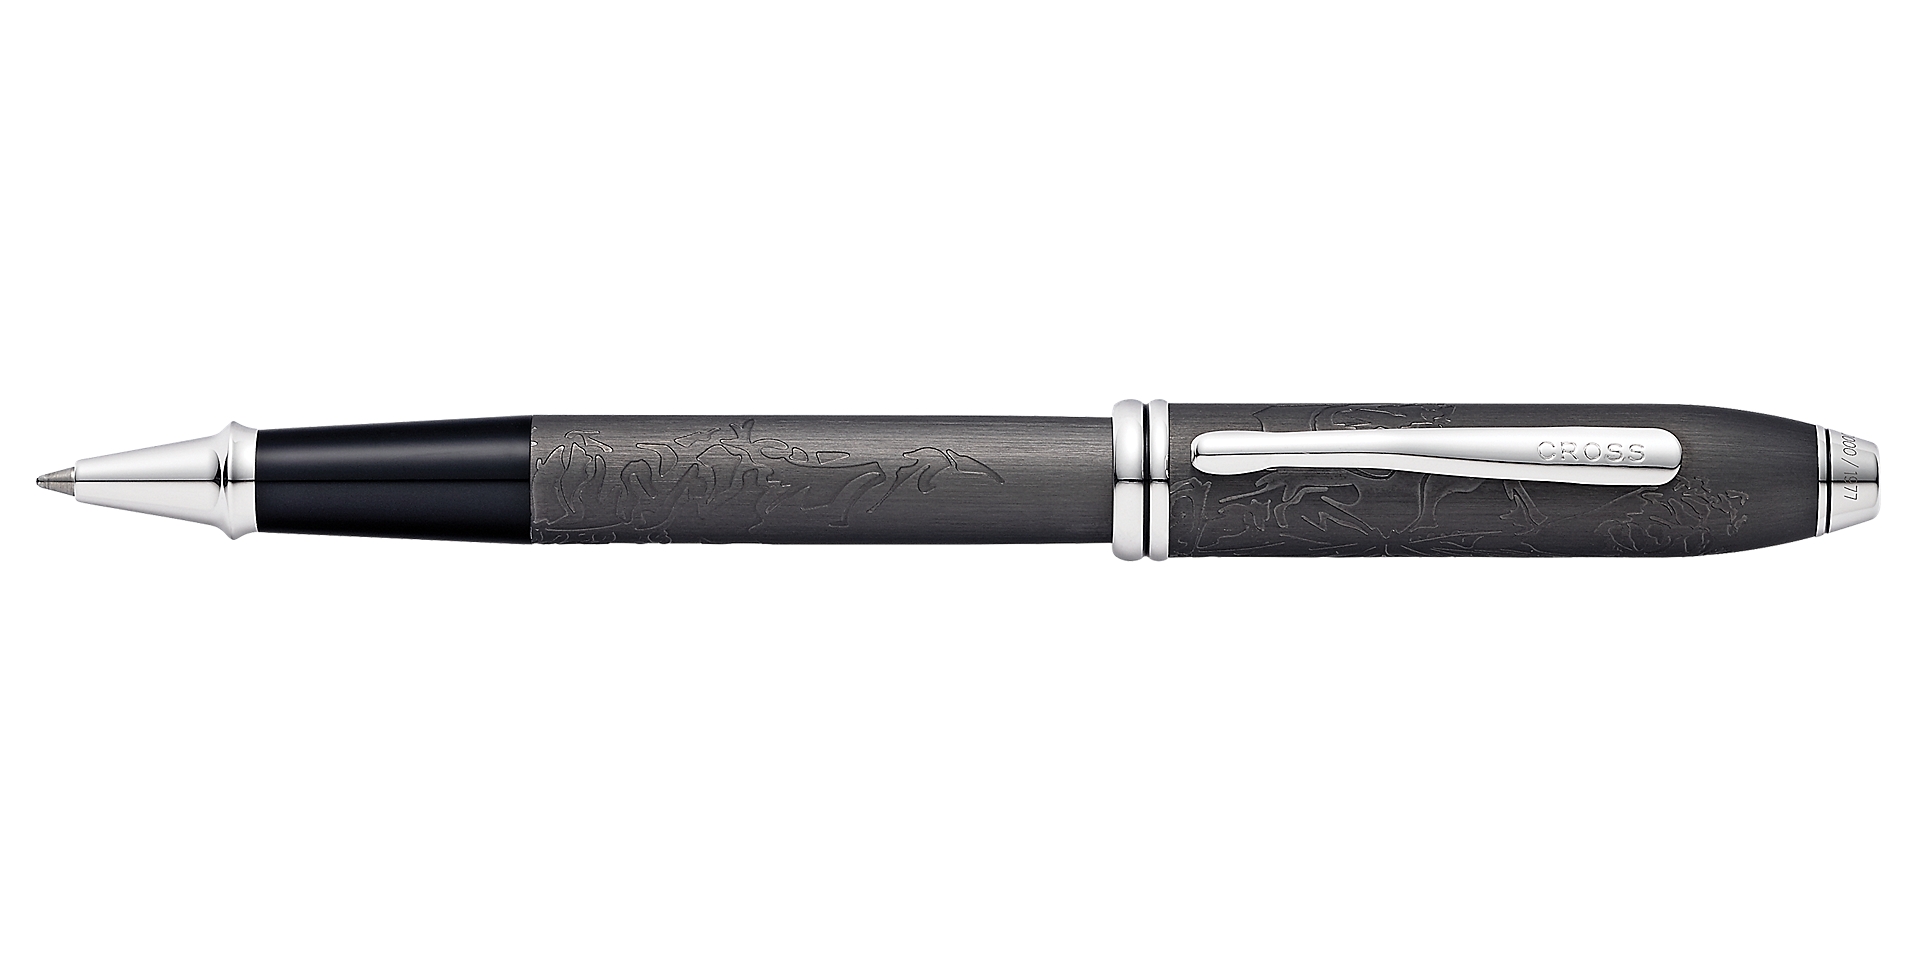  Cross Townsend Star Wars™ Limited-Edition Han Solo™ Rollerball Pen